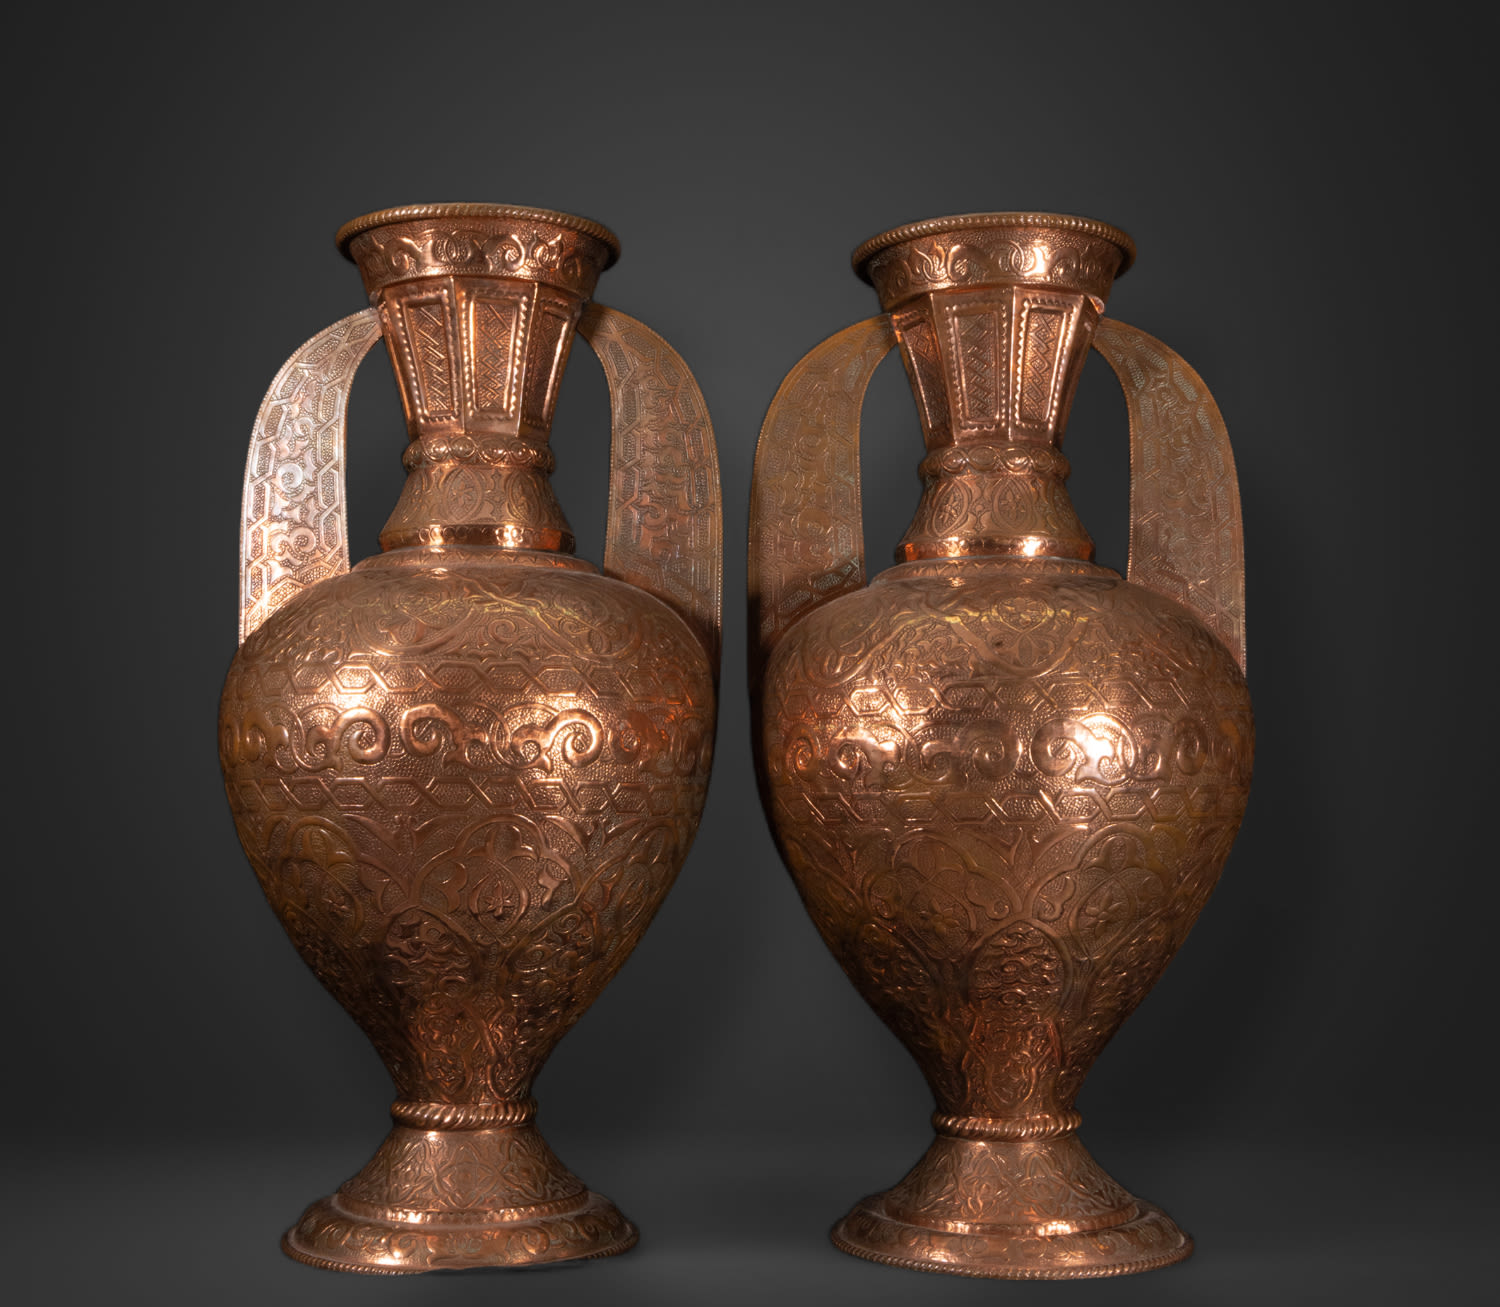 Pair of Large Embossed Copper Vases in the "Alhambra" style, Andalusian Granada work from the 19th c - Image 2 of 10